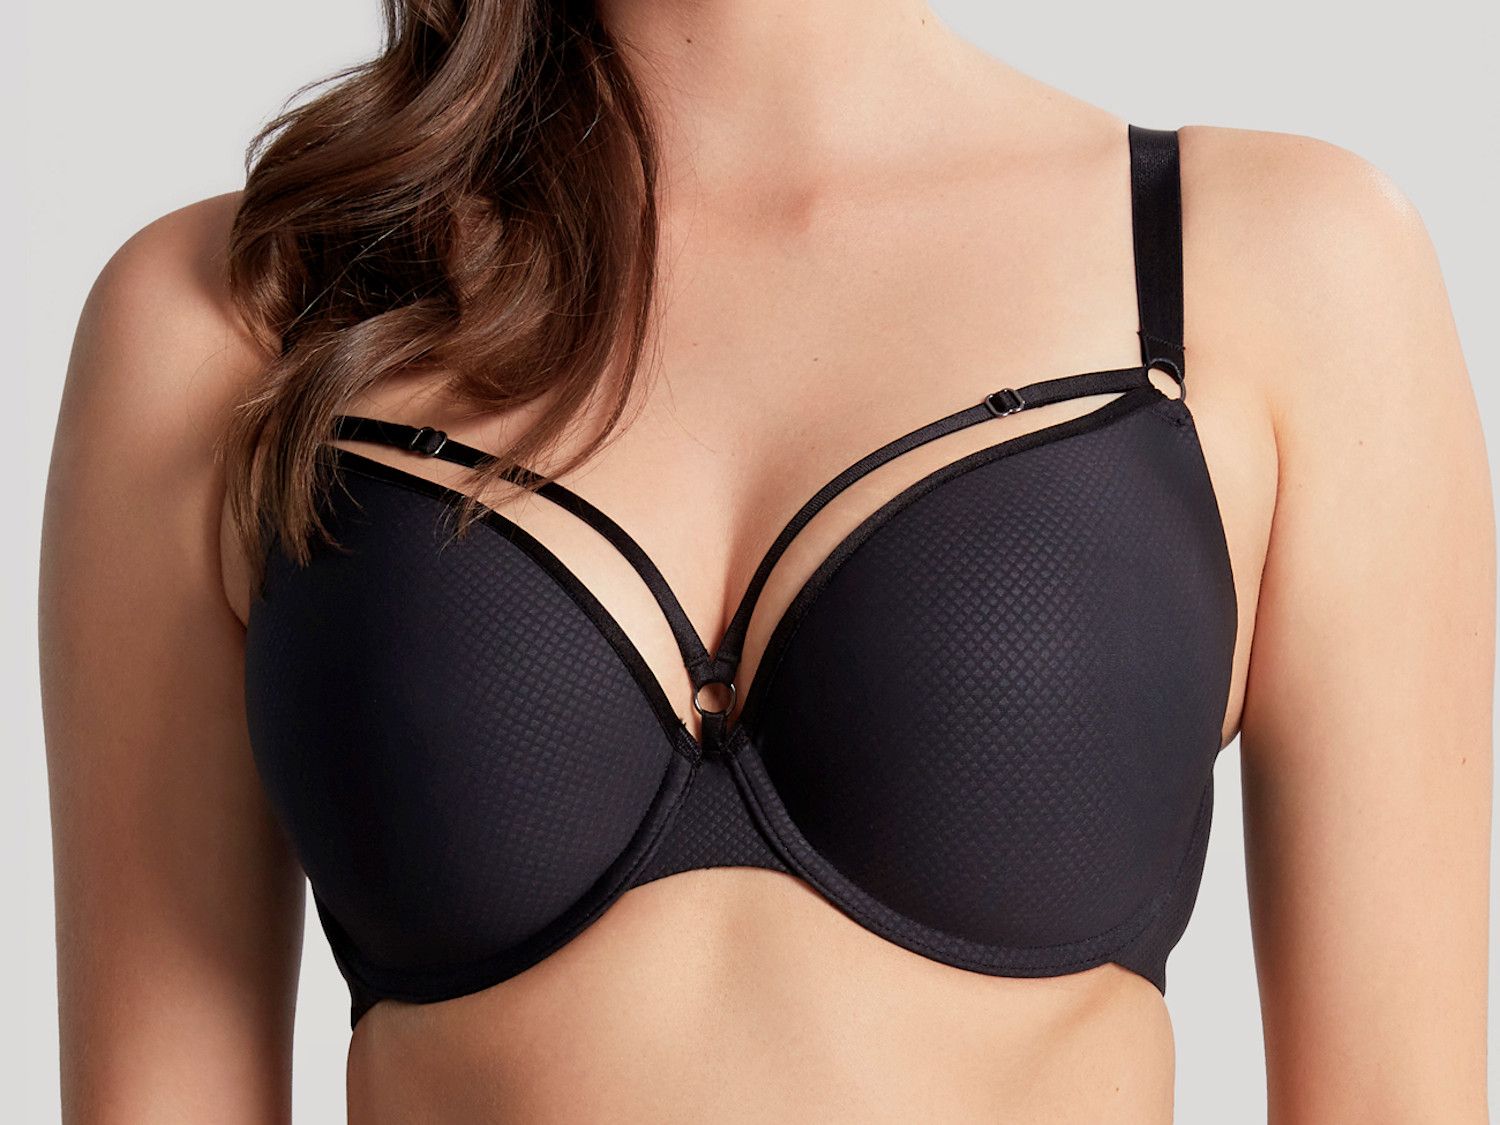 With or without a bra under this? : r/torrid